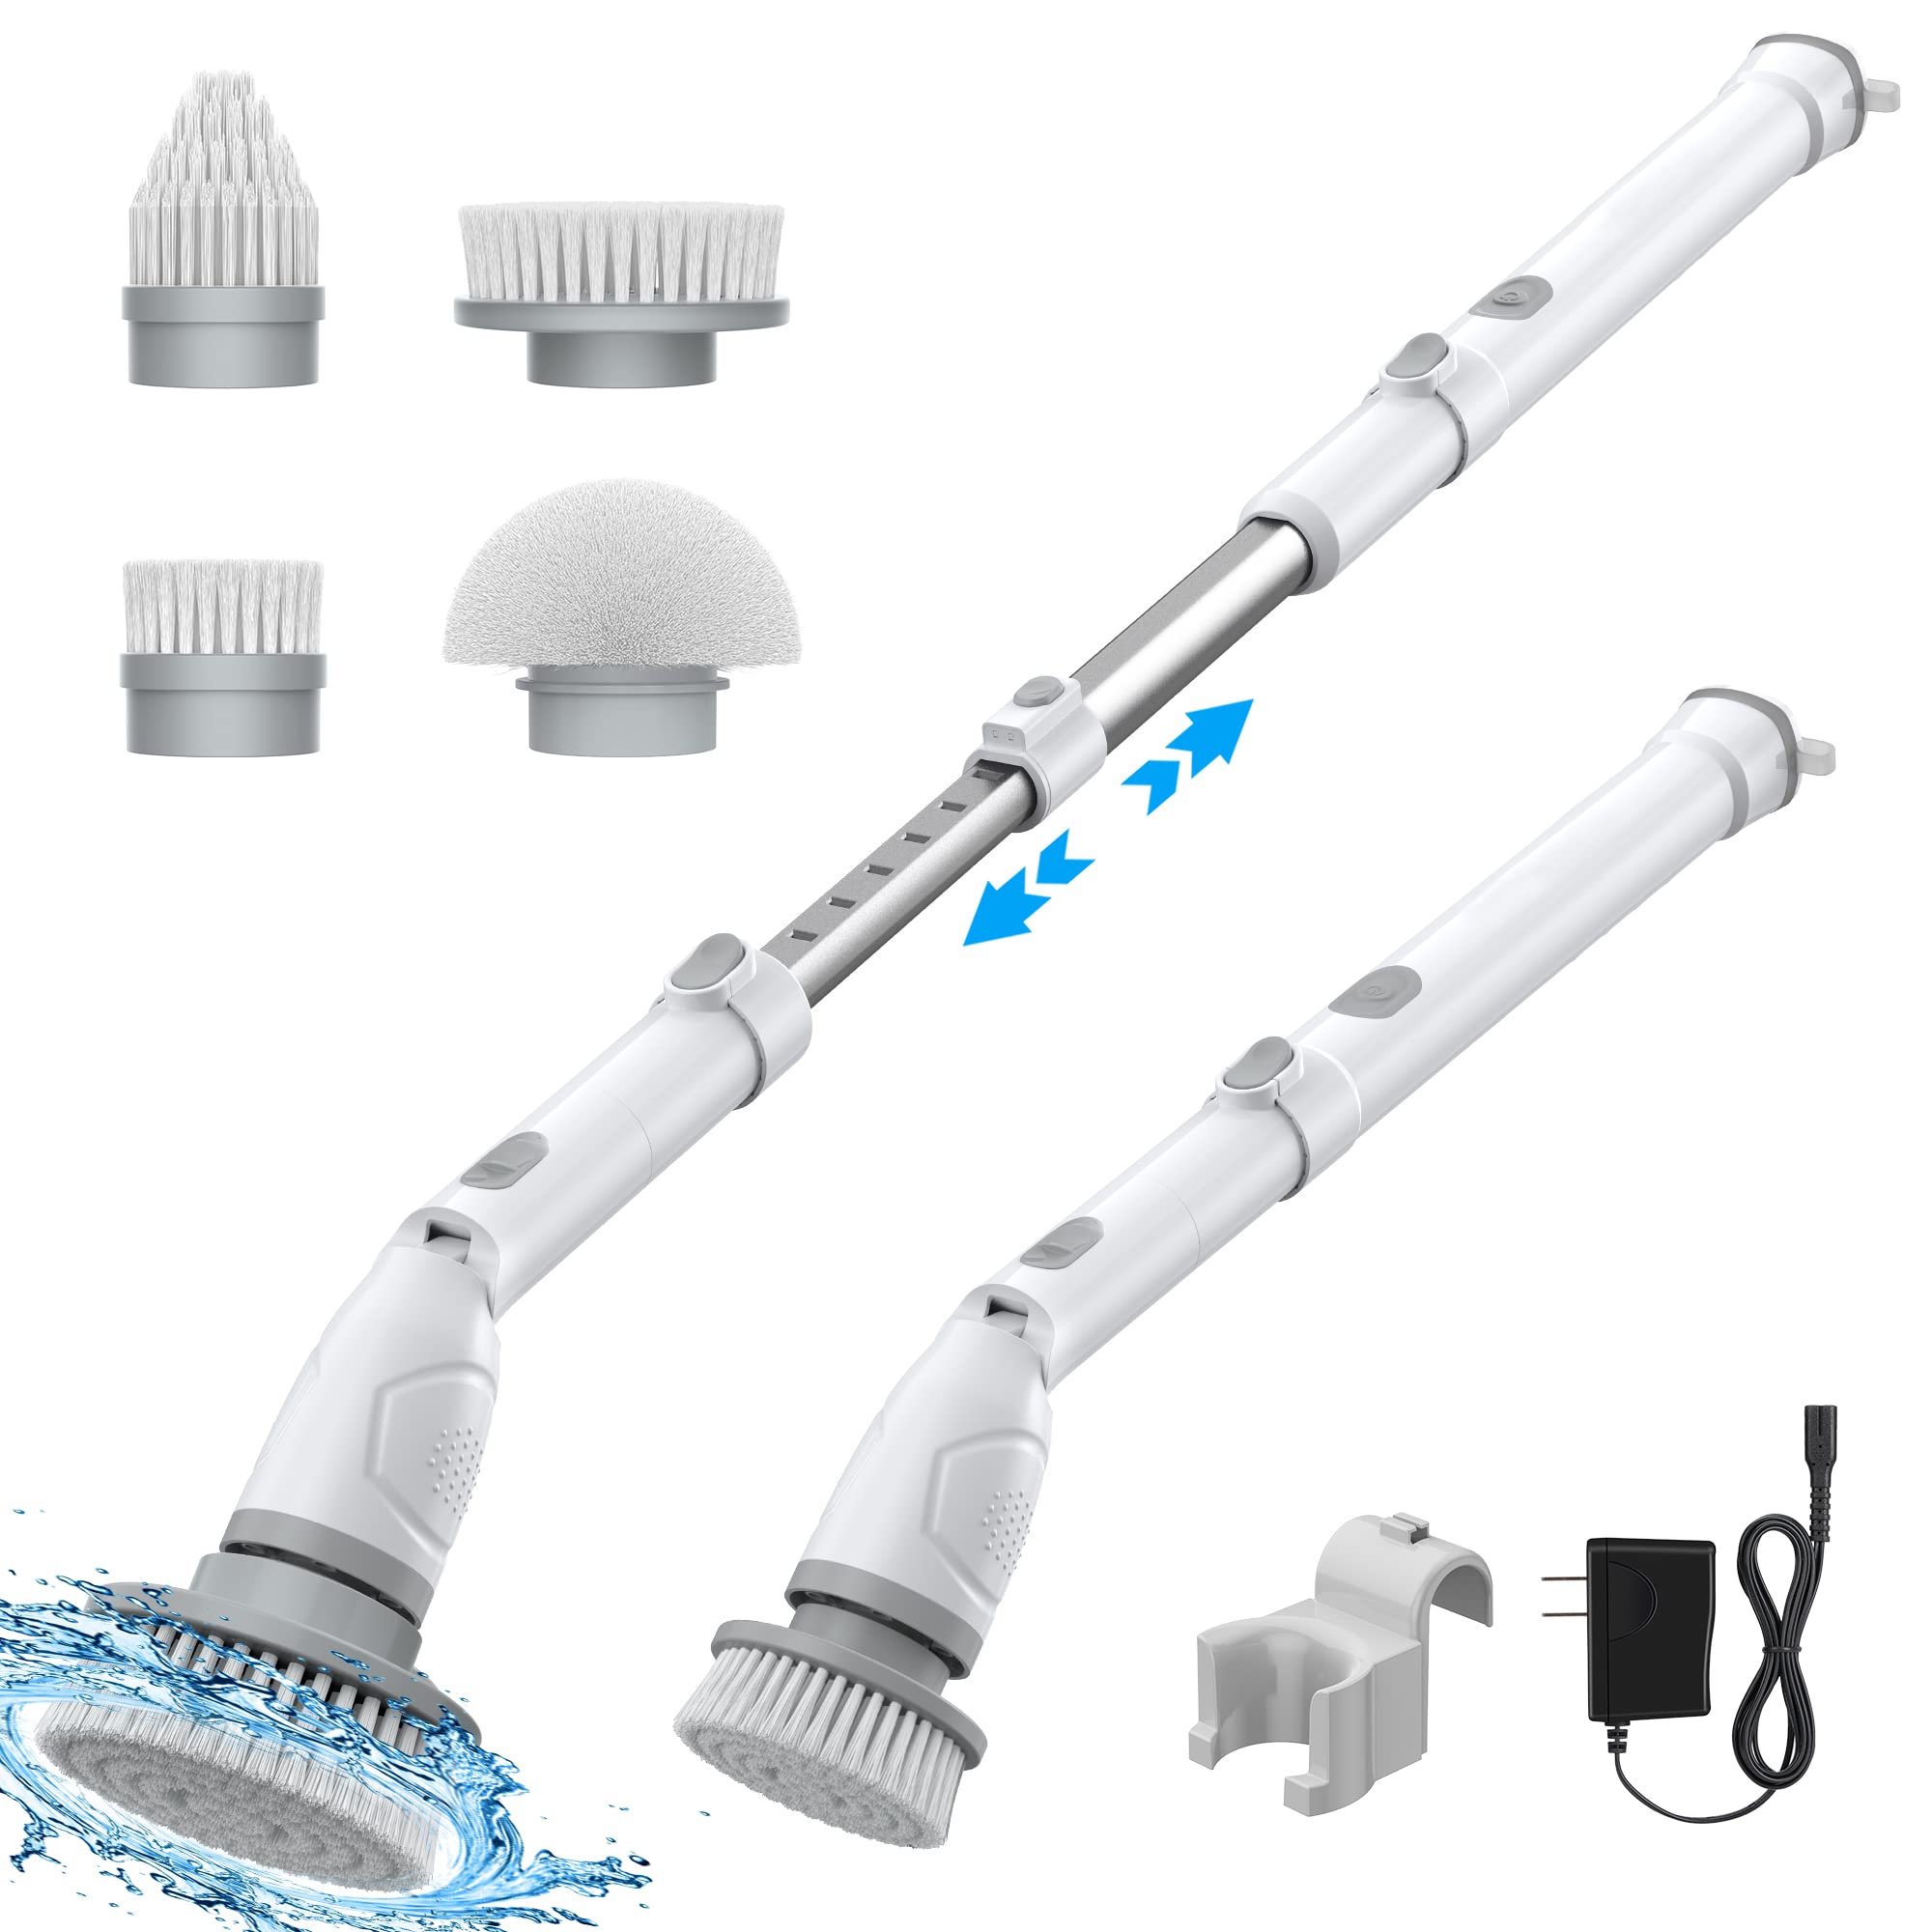 Voweek Electric Spin Scrubber, Power Scrubber with 4 Replaceable Brush Heads and Adjustable Extension Arm, Cordless Household Cleaning Brush for Bathroom Tub Tile Floor